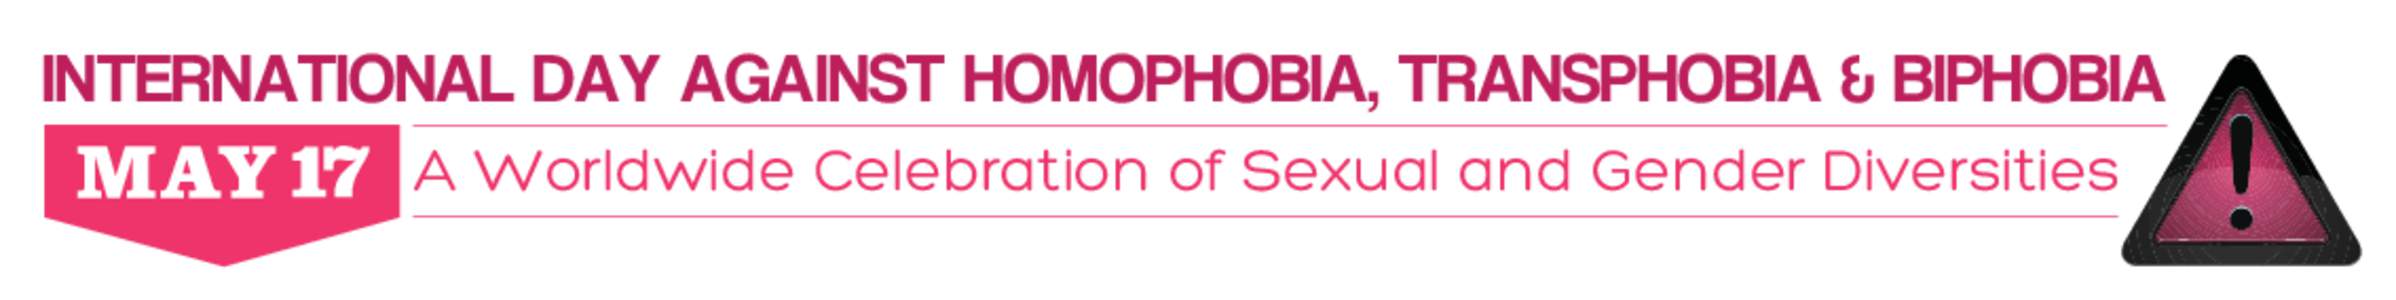 INTERNATIONAL DAY AGAINST HOMOPHOBIA, TRANSPHOBIA & BIPHOBIA A Worldwide Celebration of Sexual and Gender Diversities 